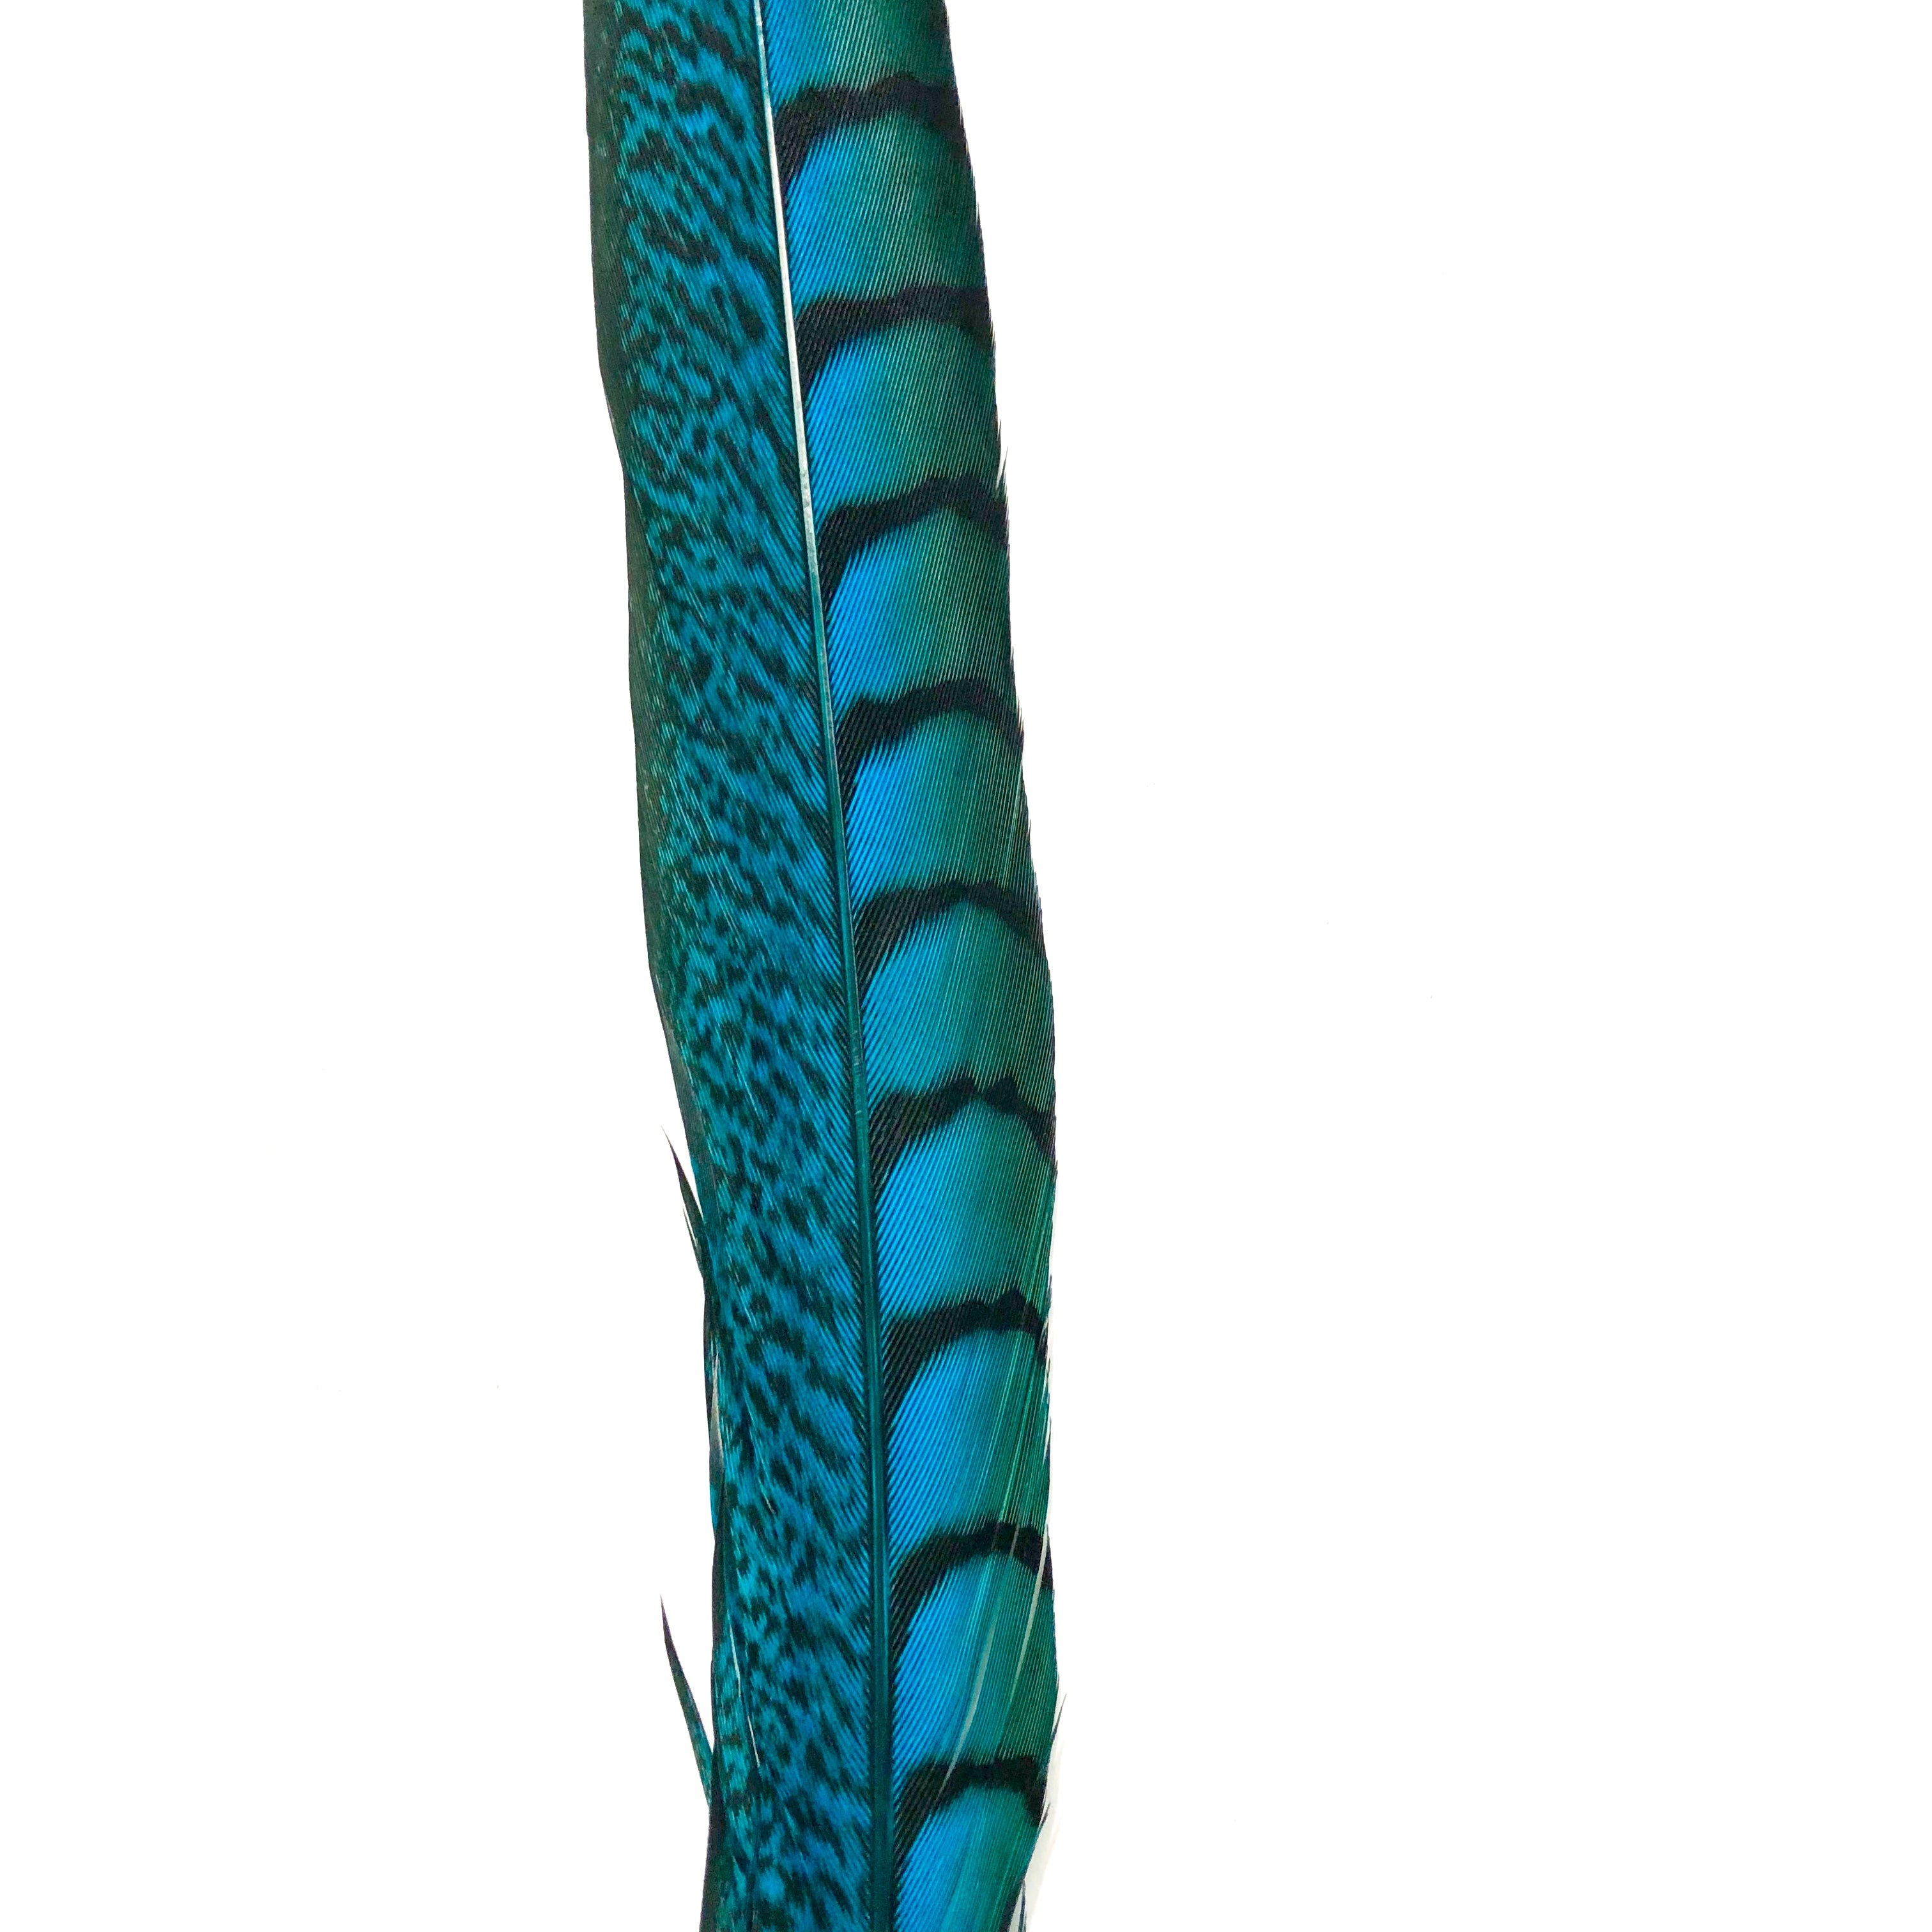 10" to 20" Lady Amherst Pheasant Side Tail Feather - Turquoise ((SECONDS))